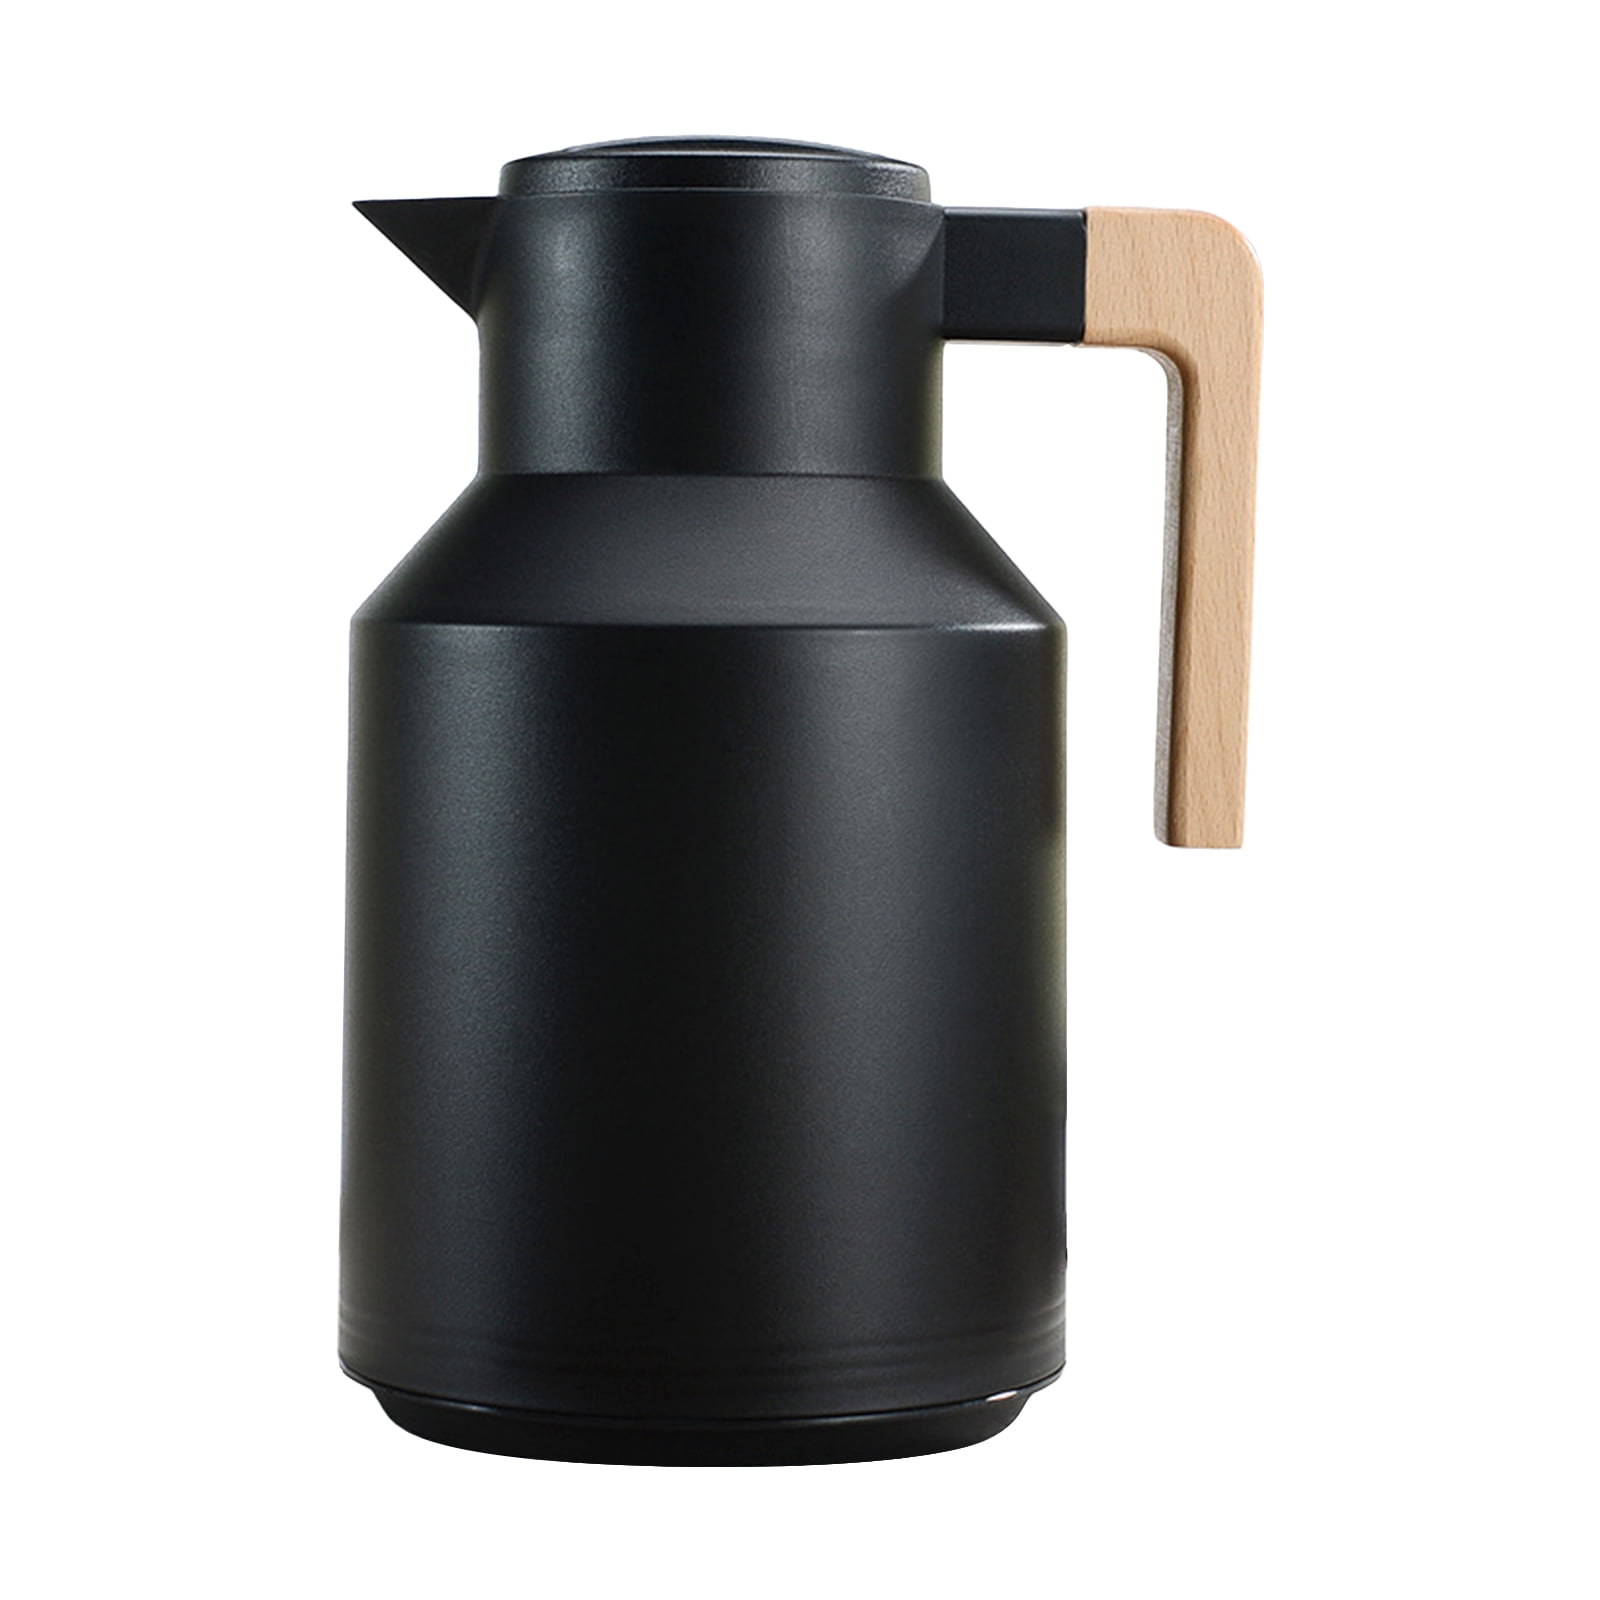 Stainless Steel Insulated Coffee Pot - Large Beverage Dispenser